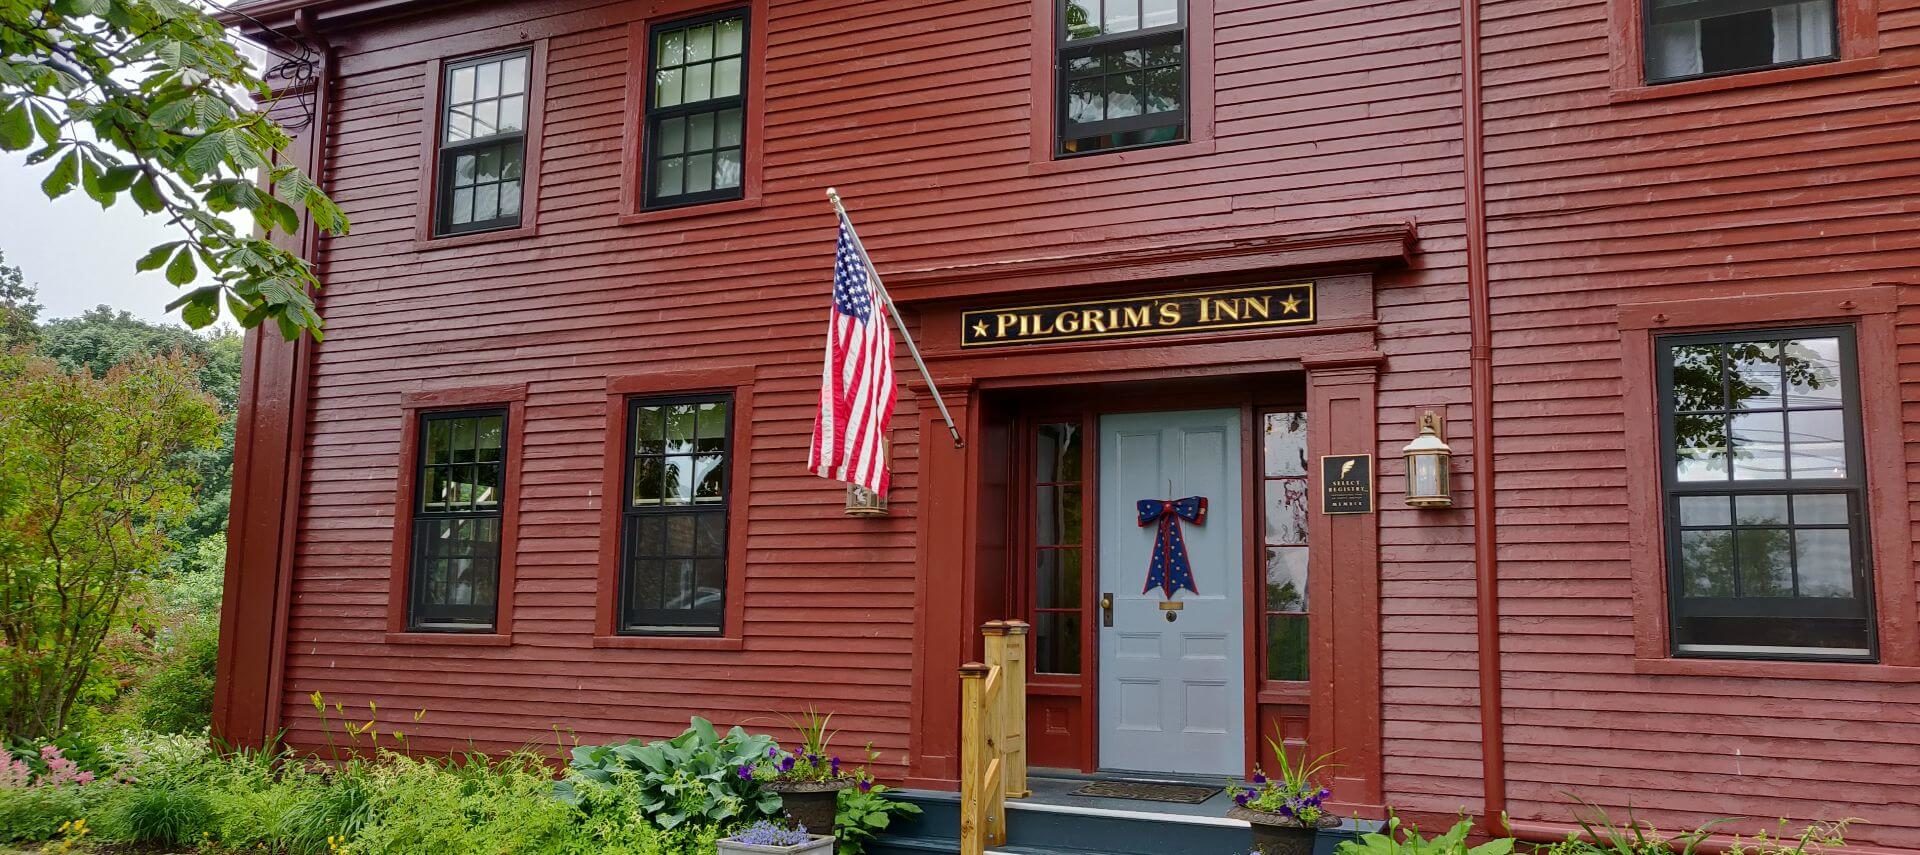 Pilgrim's Inn entrance with flag and July 4th decoration